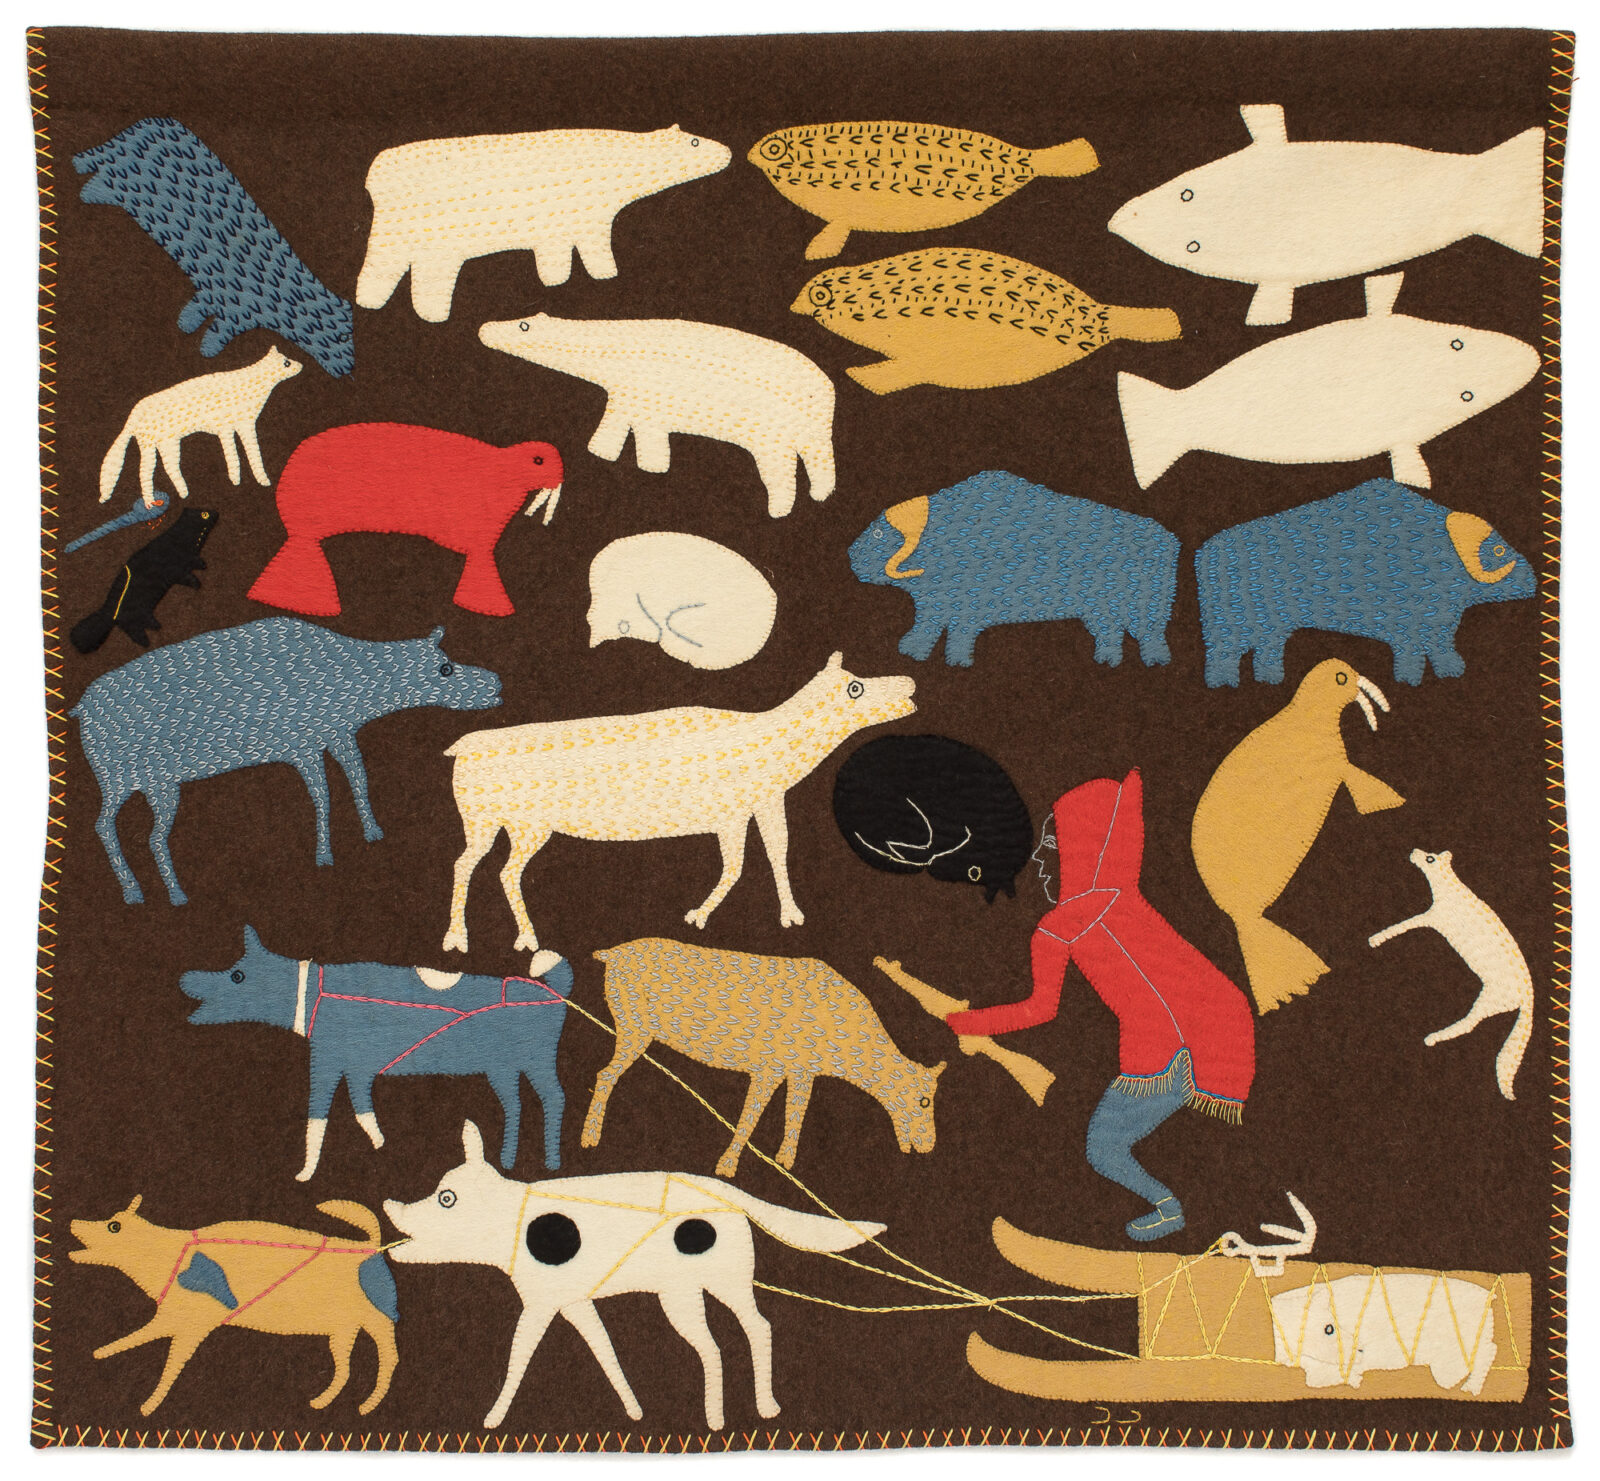 Marion Tuu’luq - untitled (memories of the hunt)